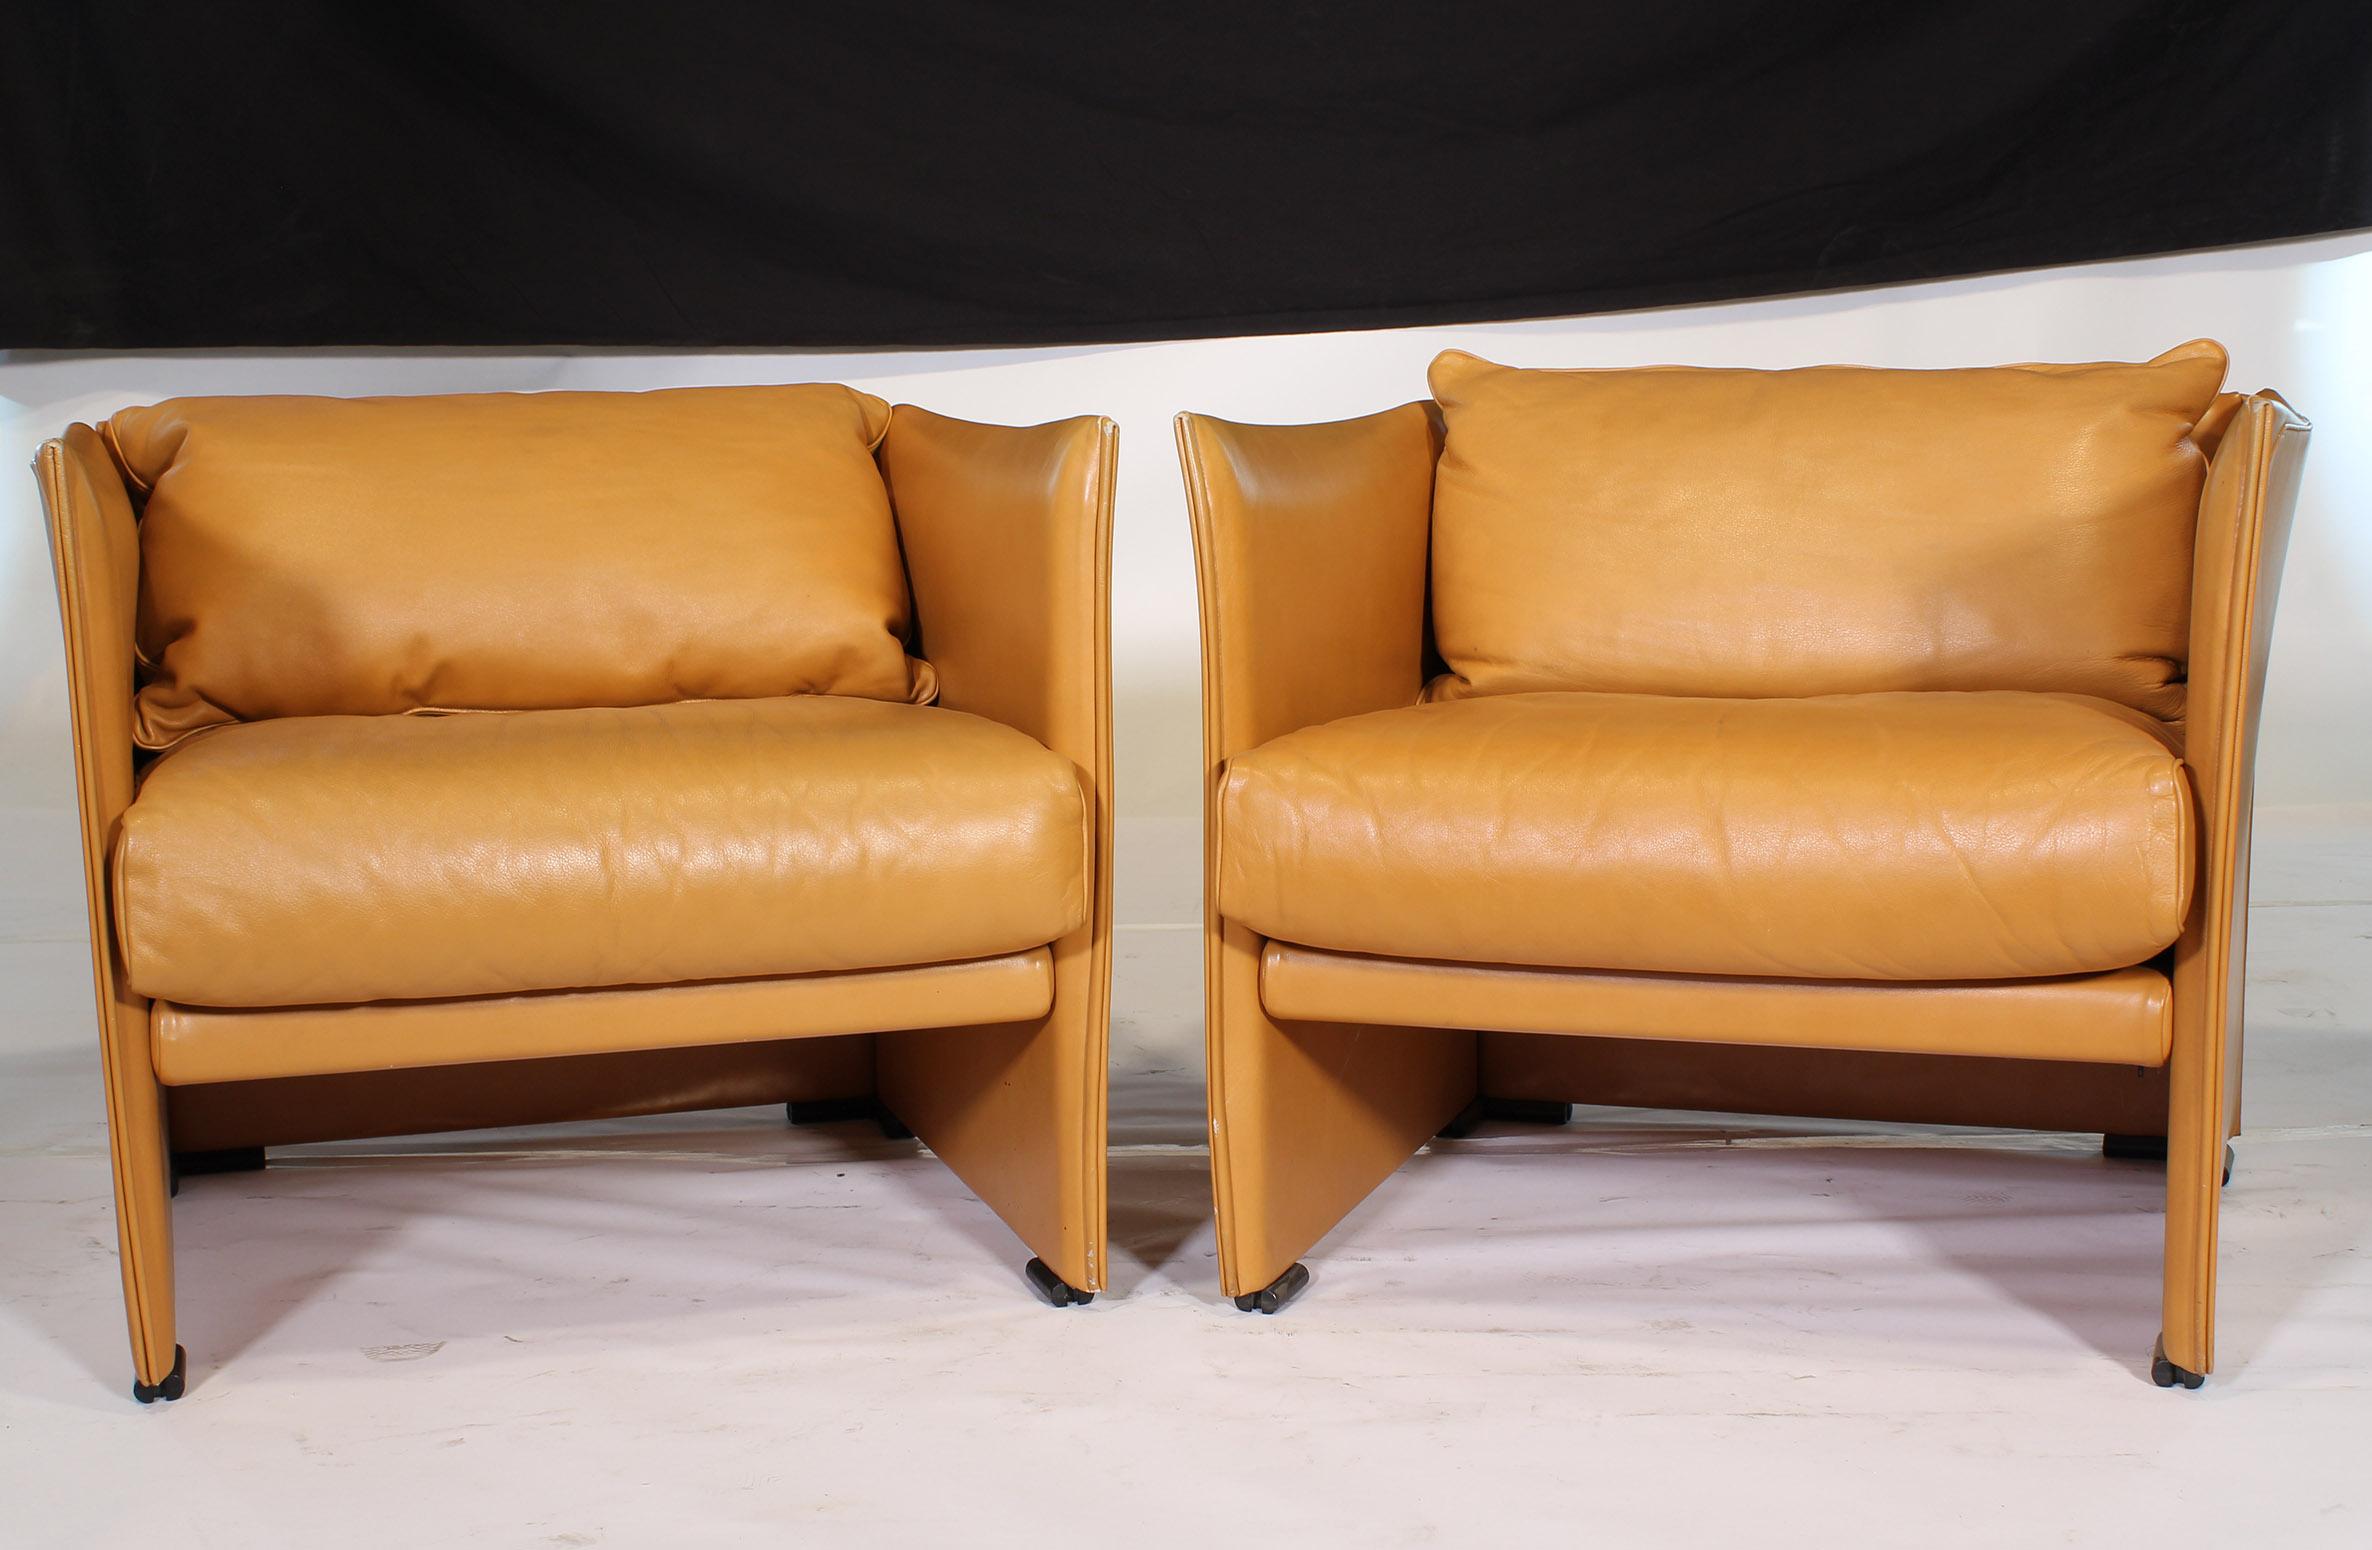 Authentic vintage set of 4 Mid-Century Modern Armchairs by Mario Bellini in light brown leather. We currently have the matching sofa available. This listing is for the four armchairs only.